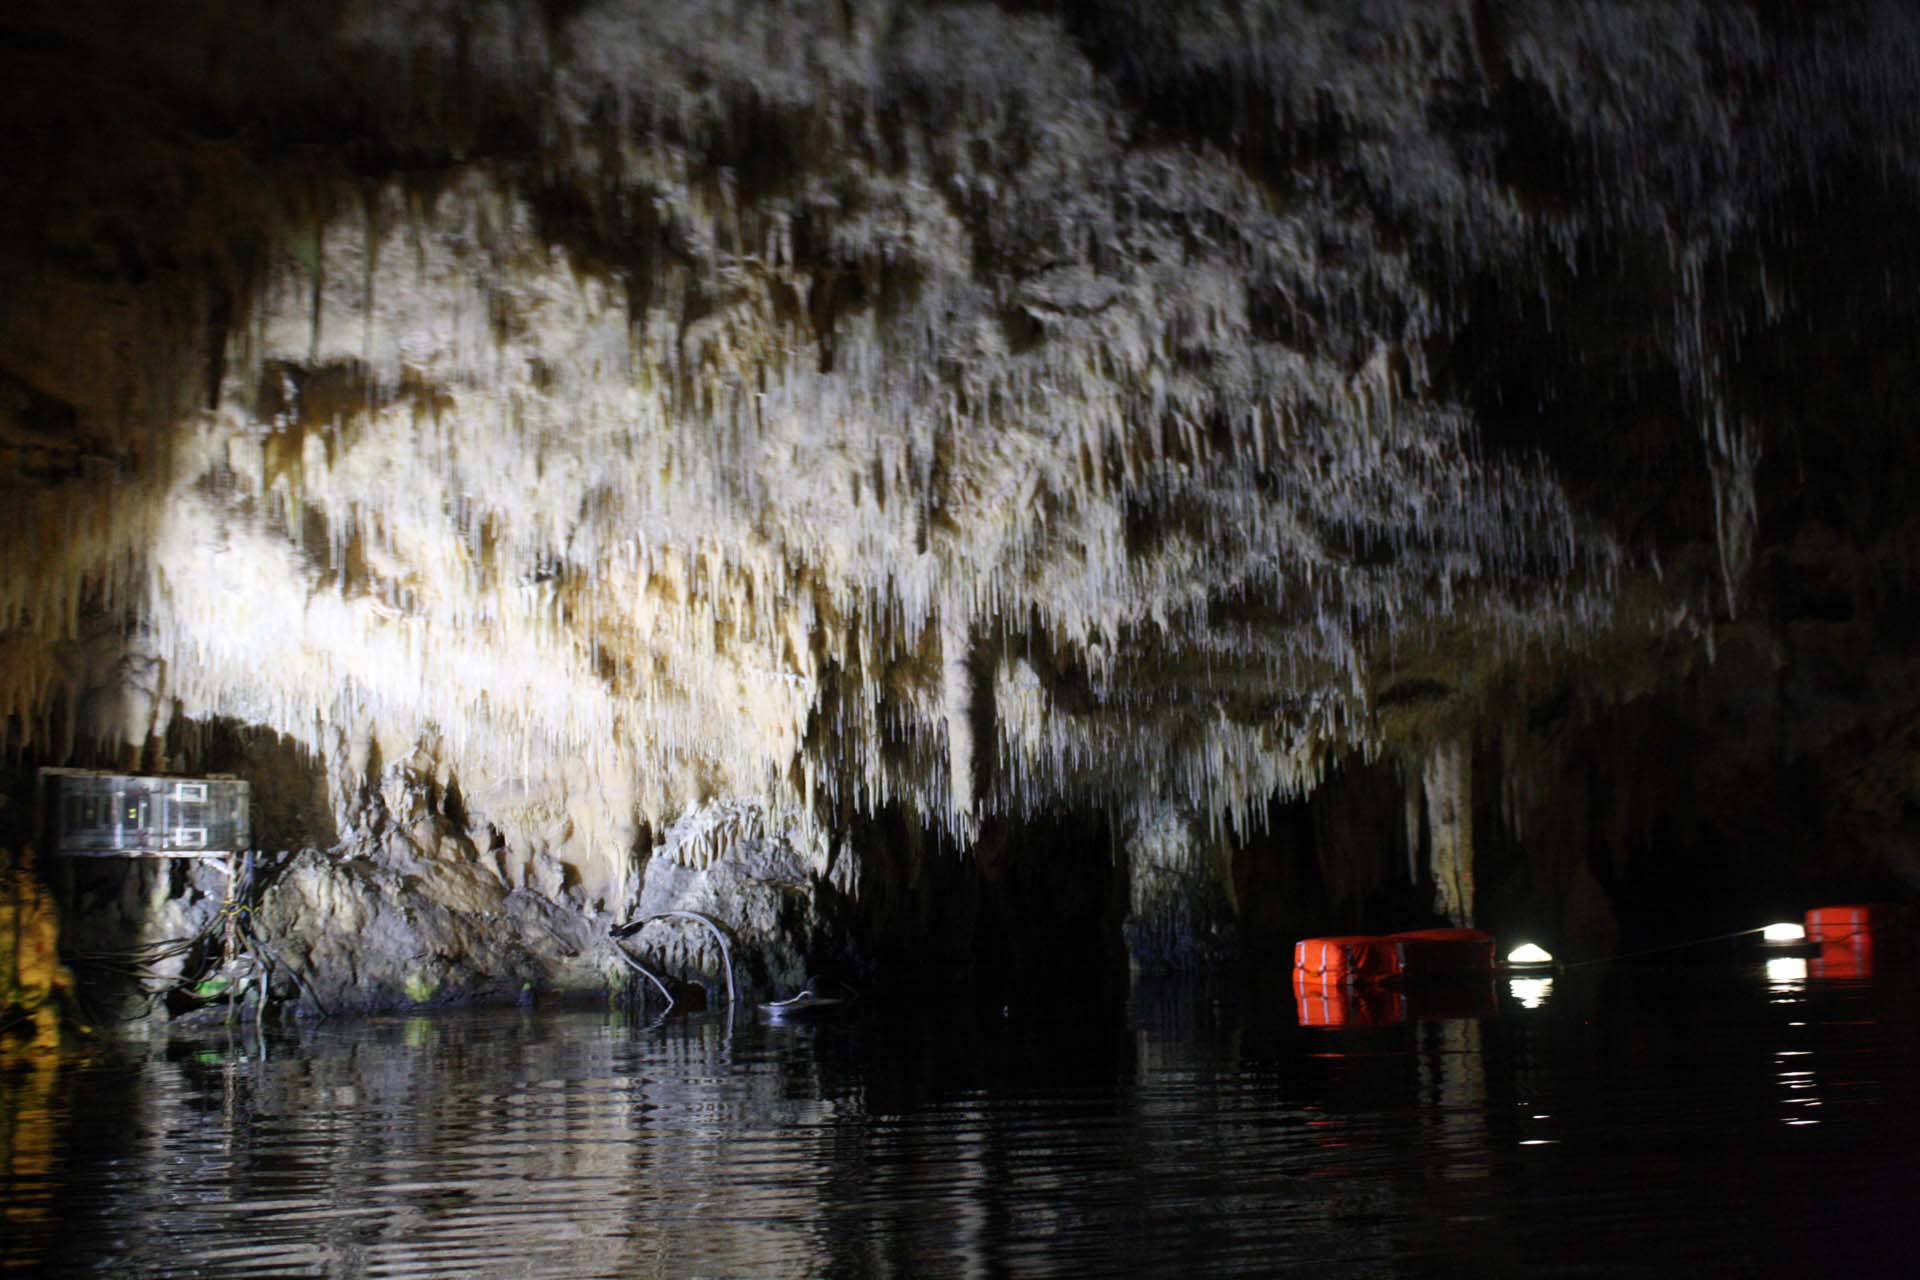 White Stalactites in the Dyros caves on water